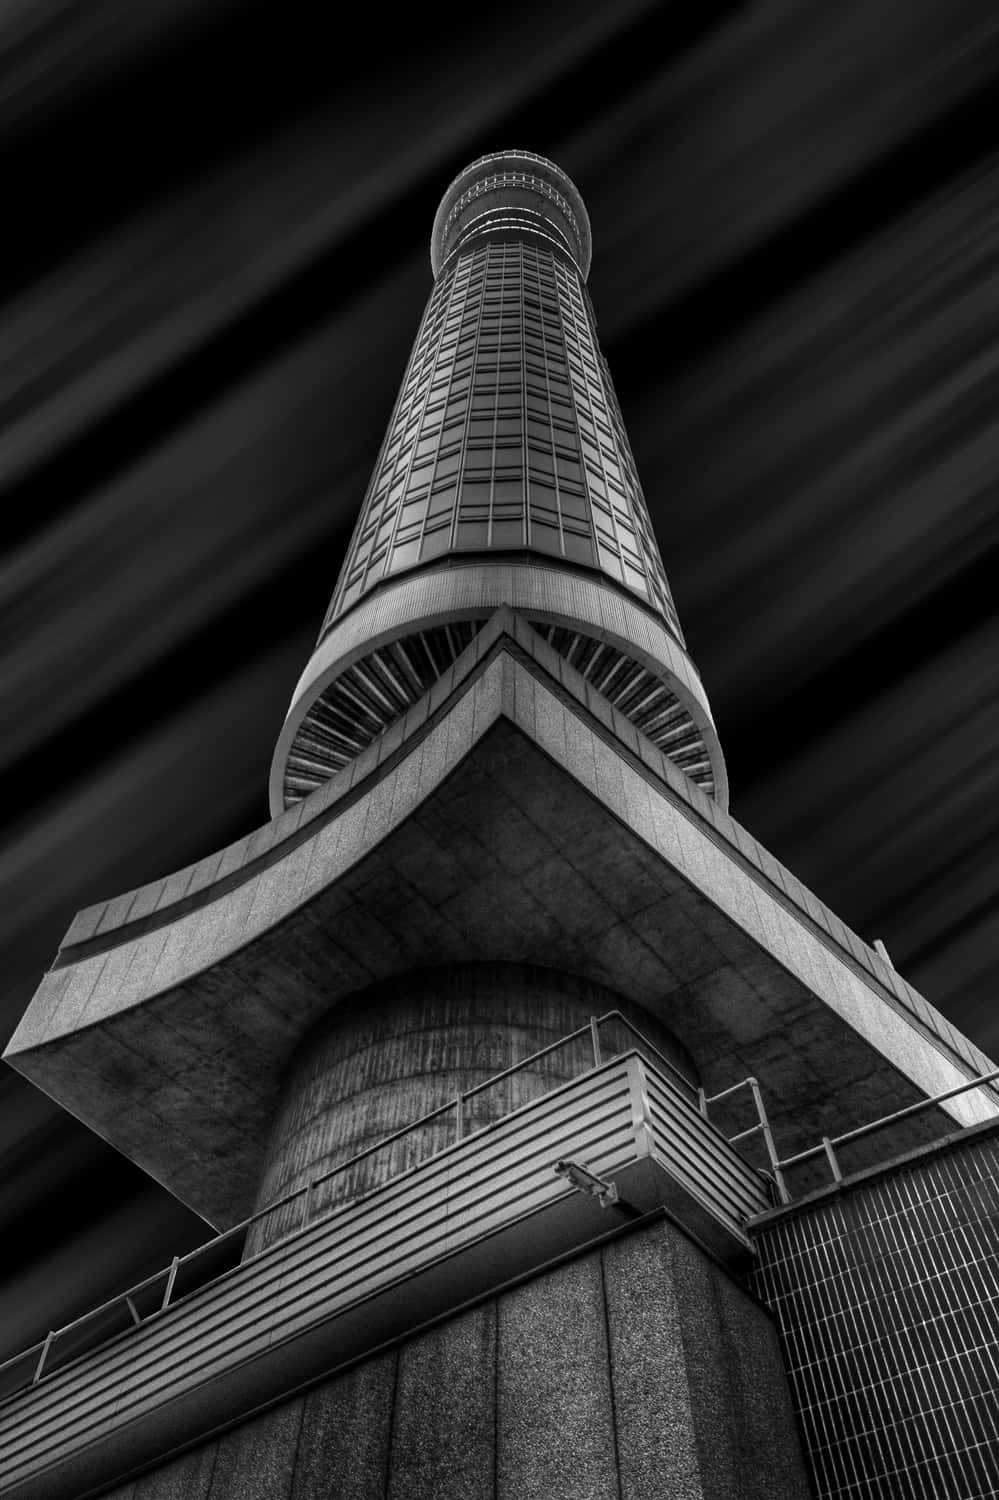 Black And White BT Tower Phone Wallpaper